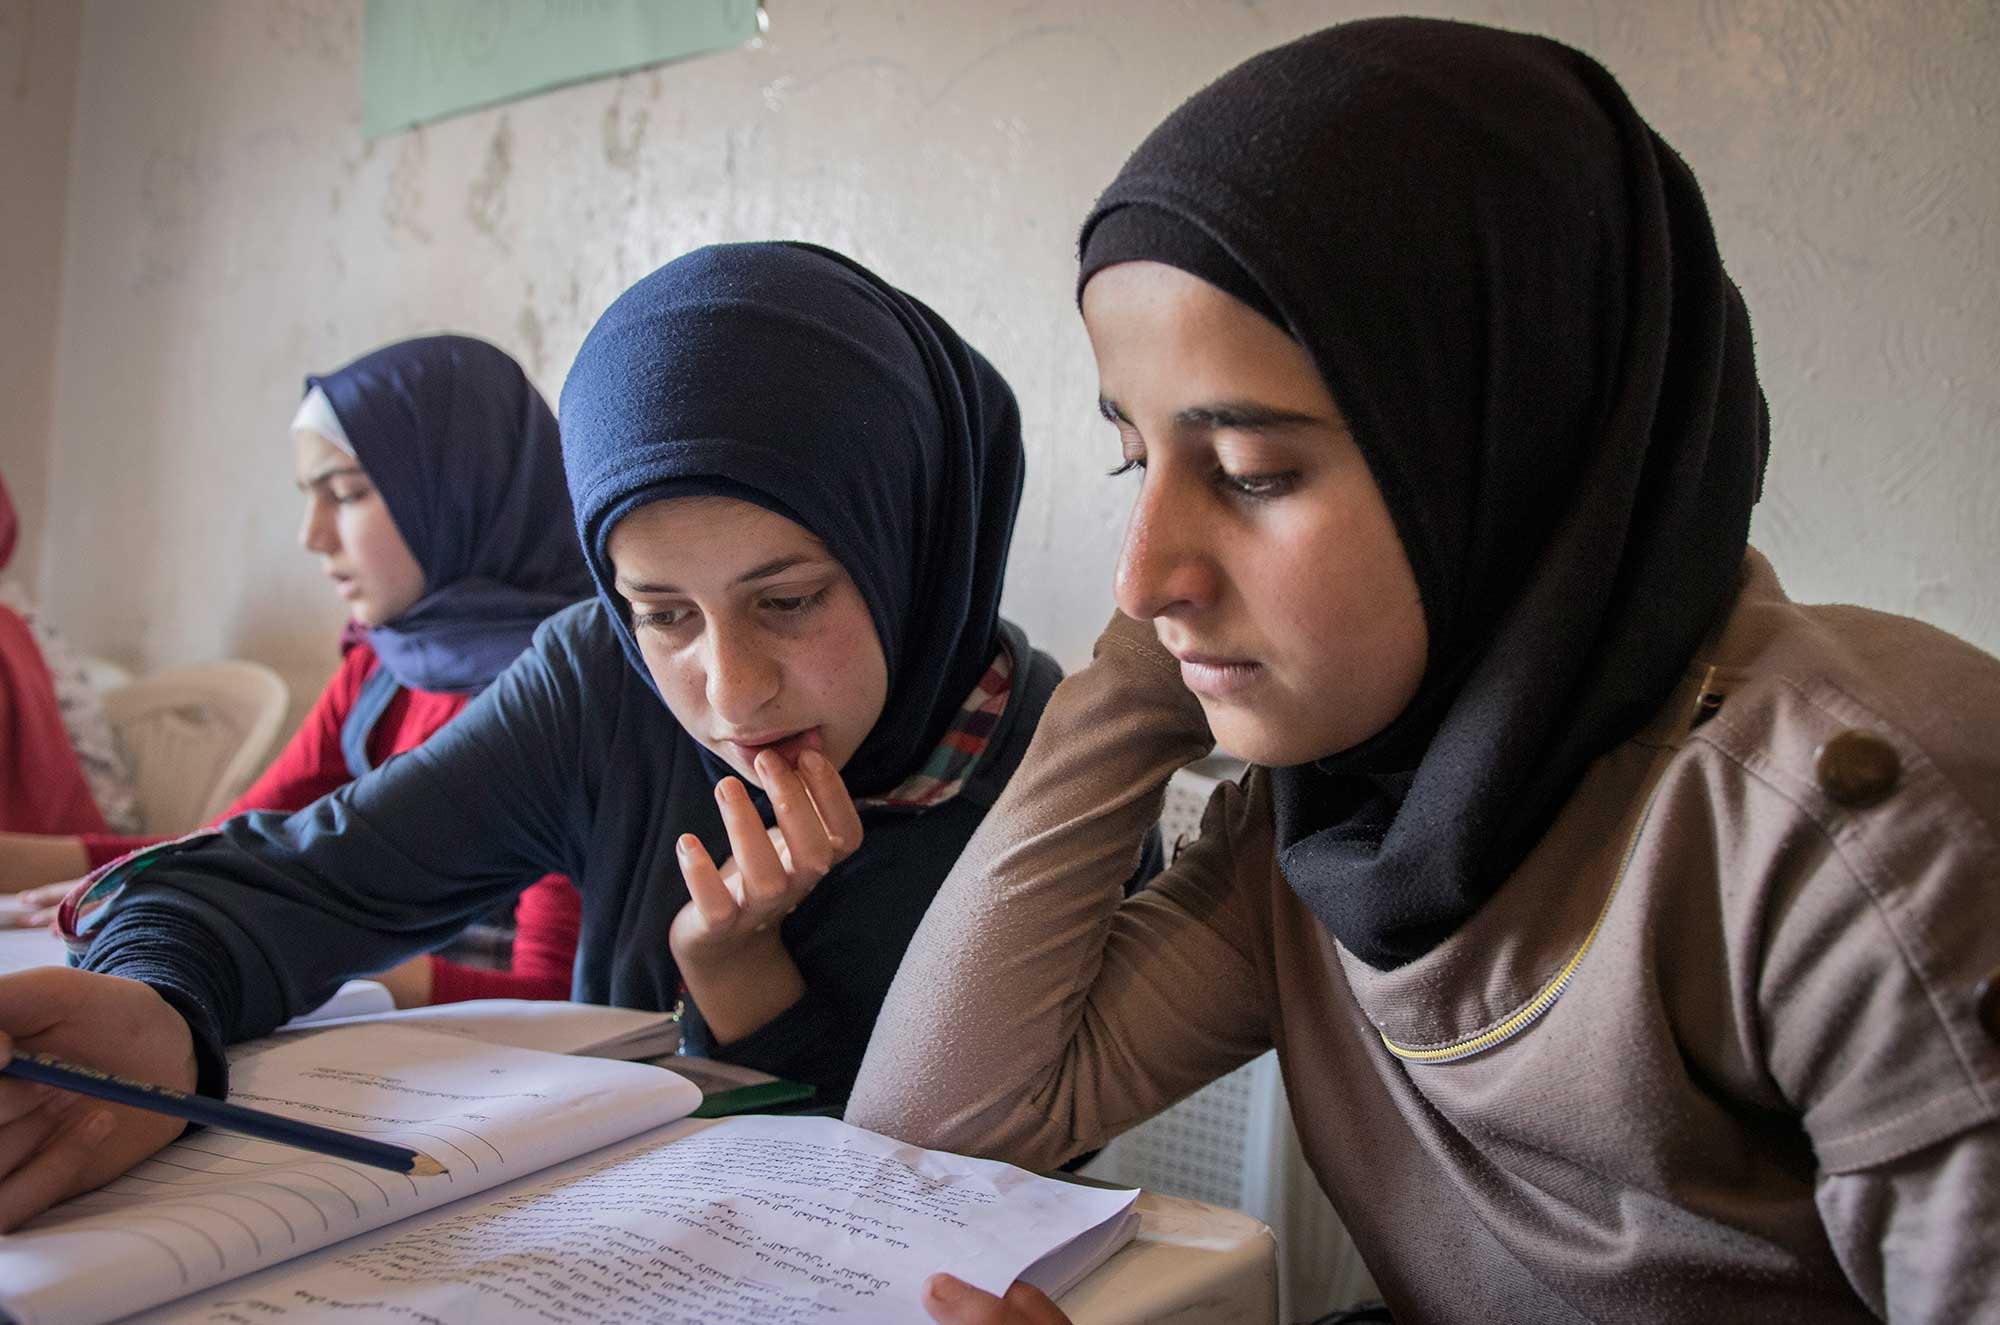 “I only knew the basic stuff before coming to these classes,” says 15-year-old Mona, “and now I’m intermediate level!” Here she joins her friend Iman, 14, in a class on reading and writing in classical Arabic.